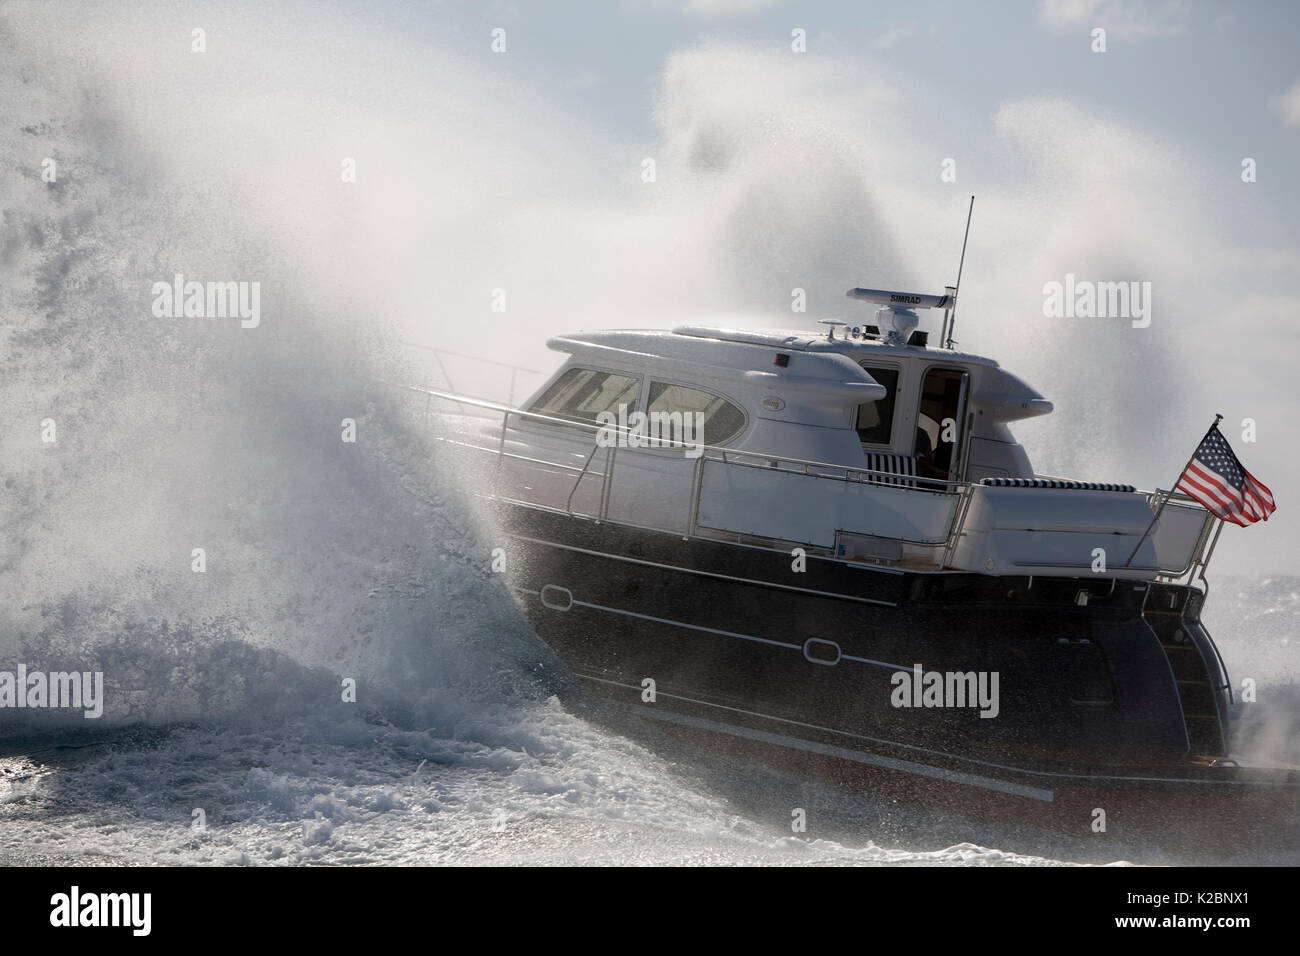 Motorboat 'Elling' at Palm beach, Florida, USA, March 2007. Stock Photo